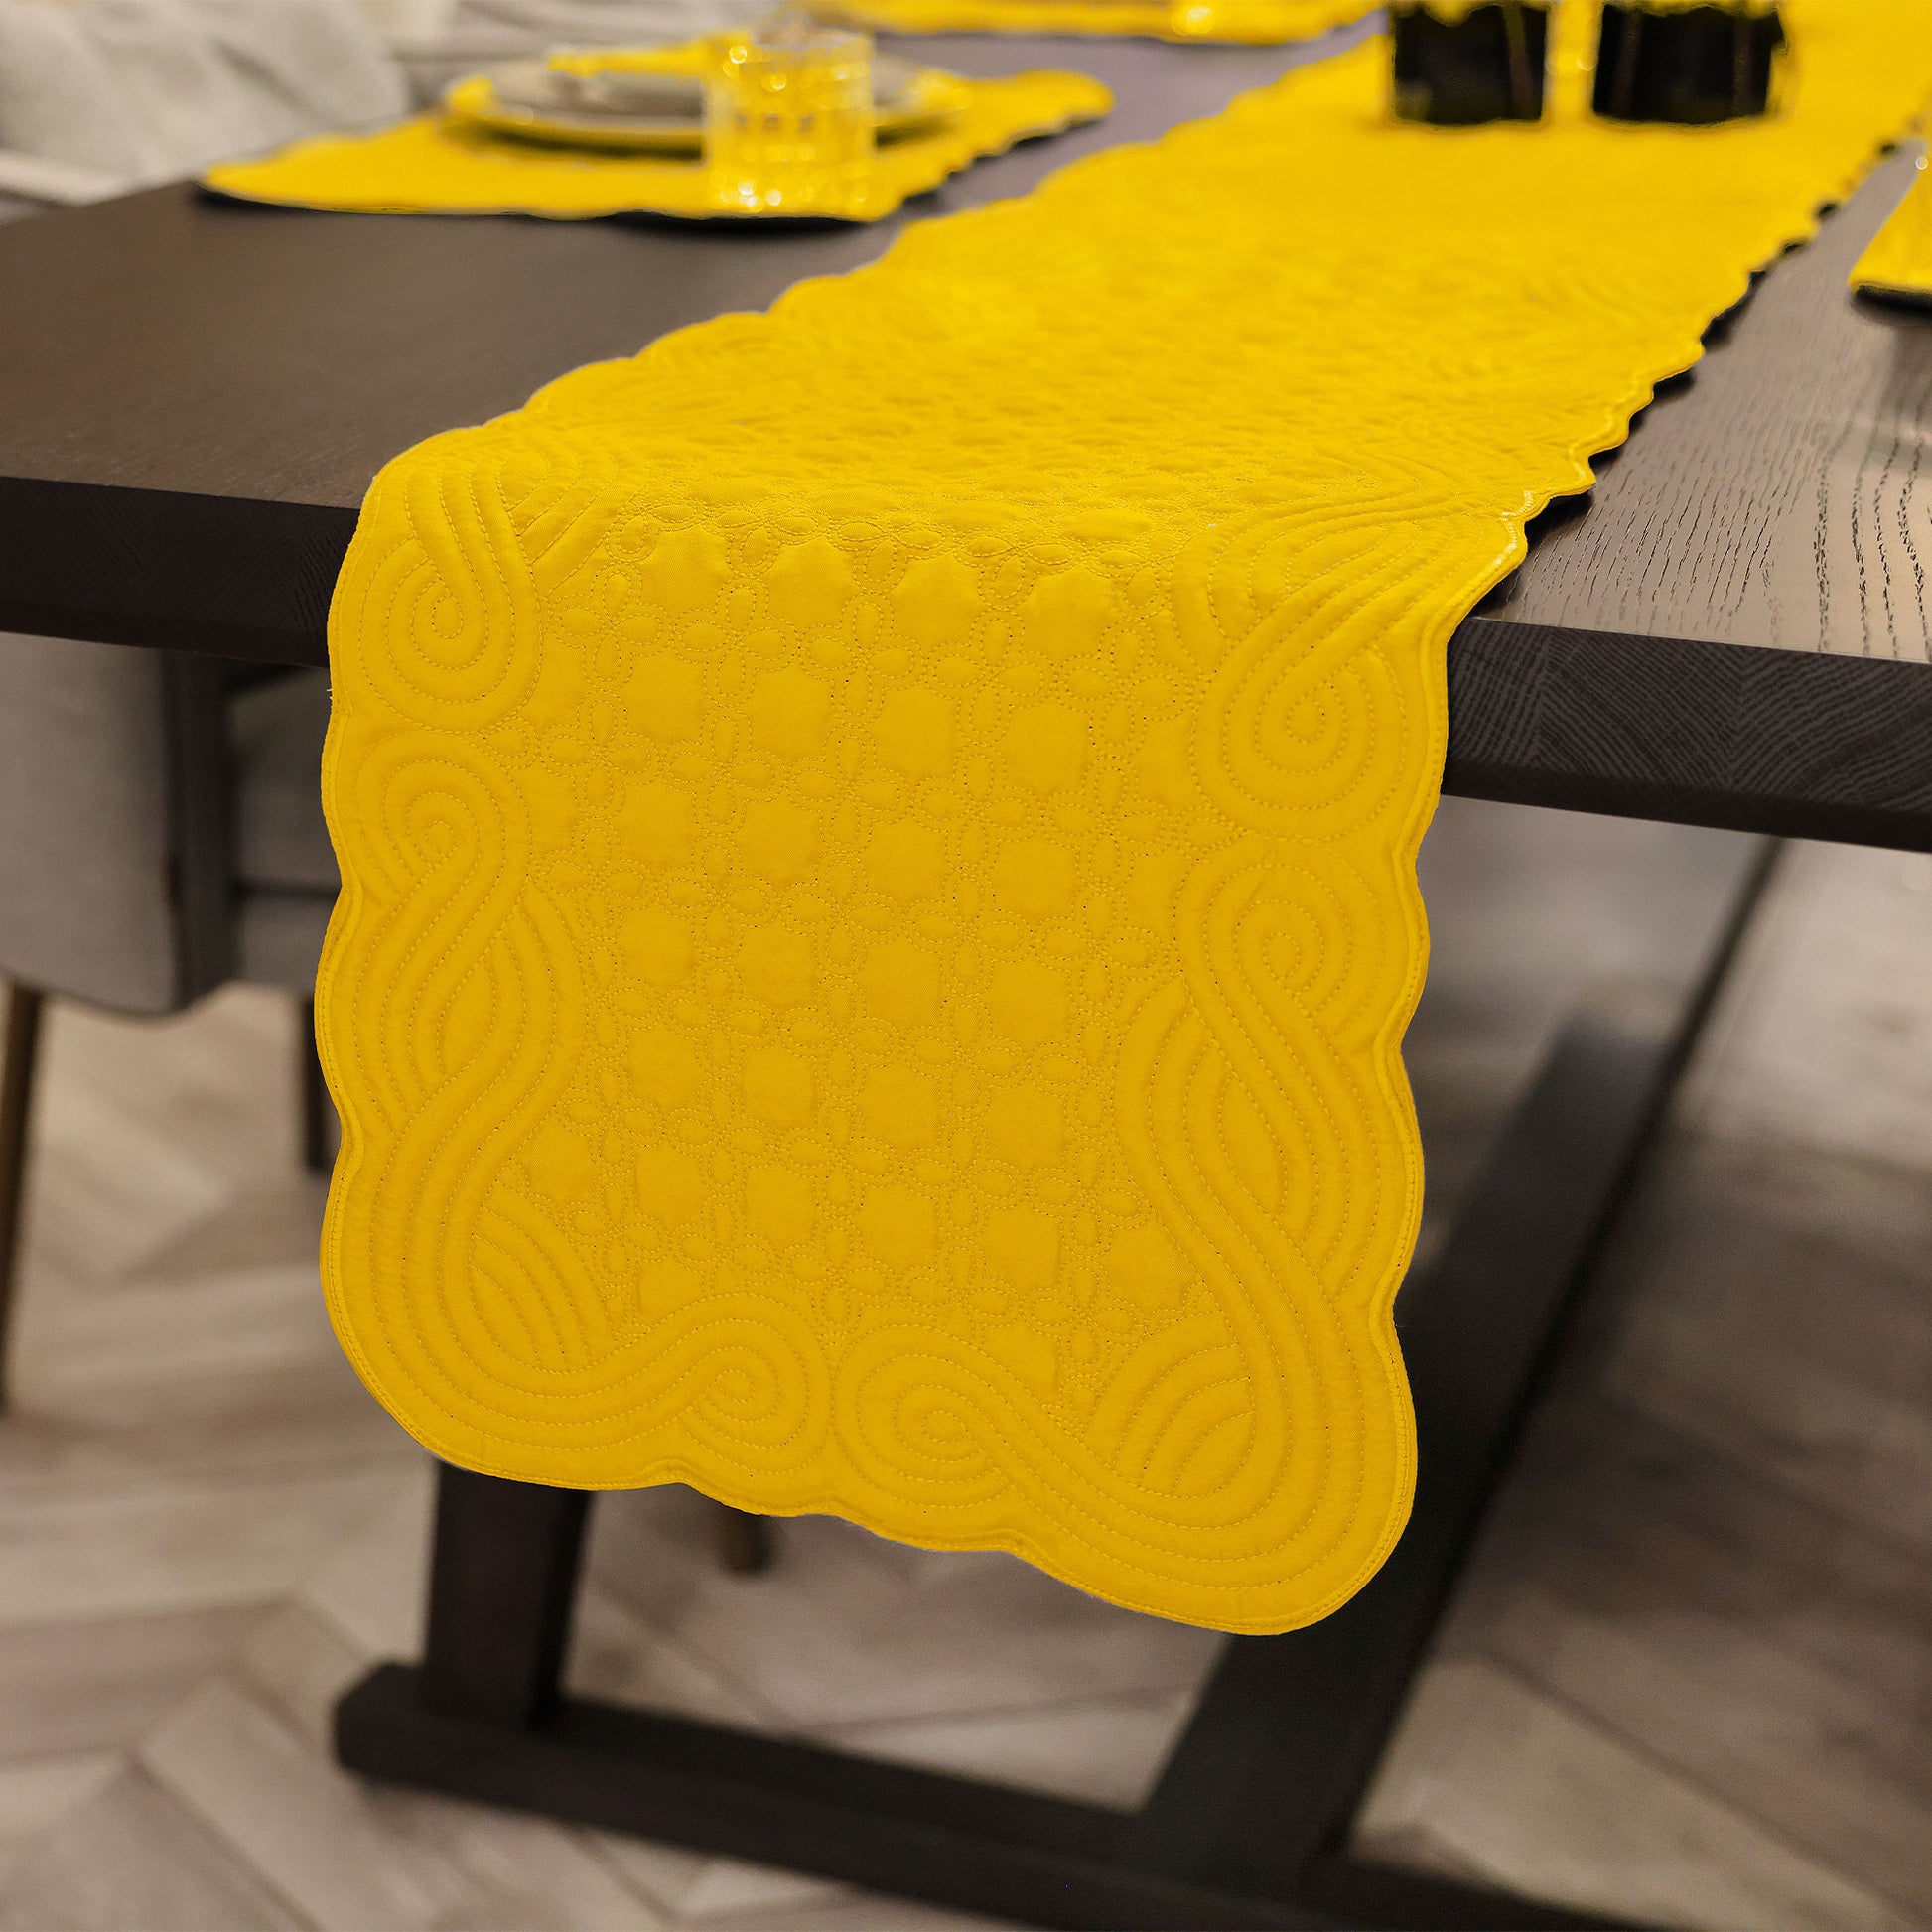 quilted-table-runner